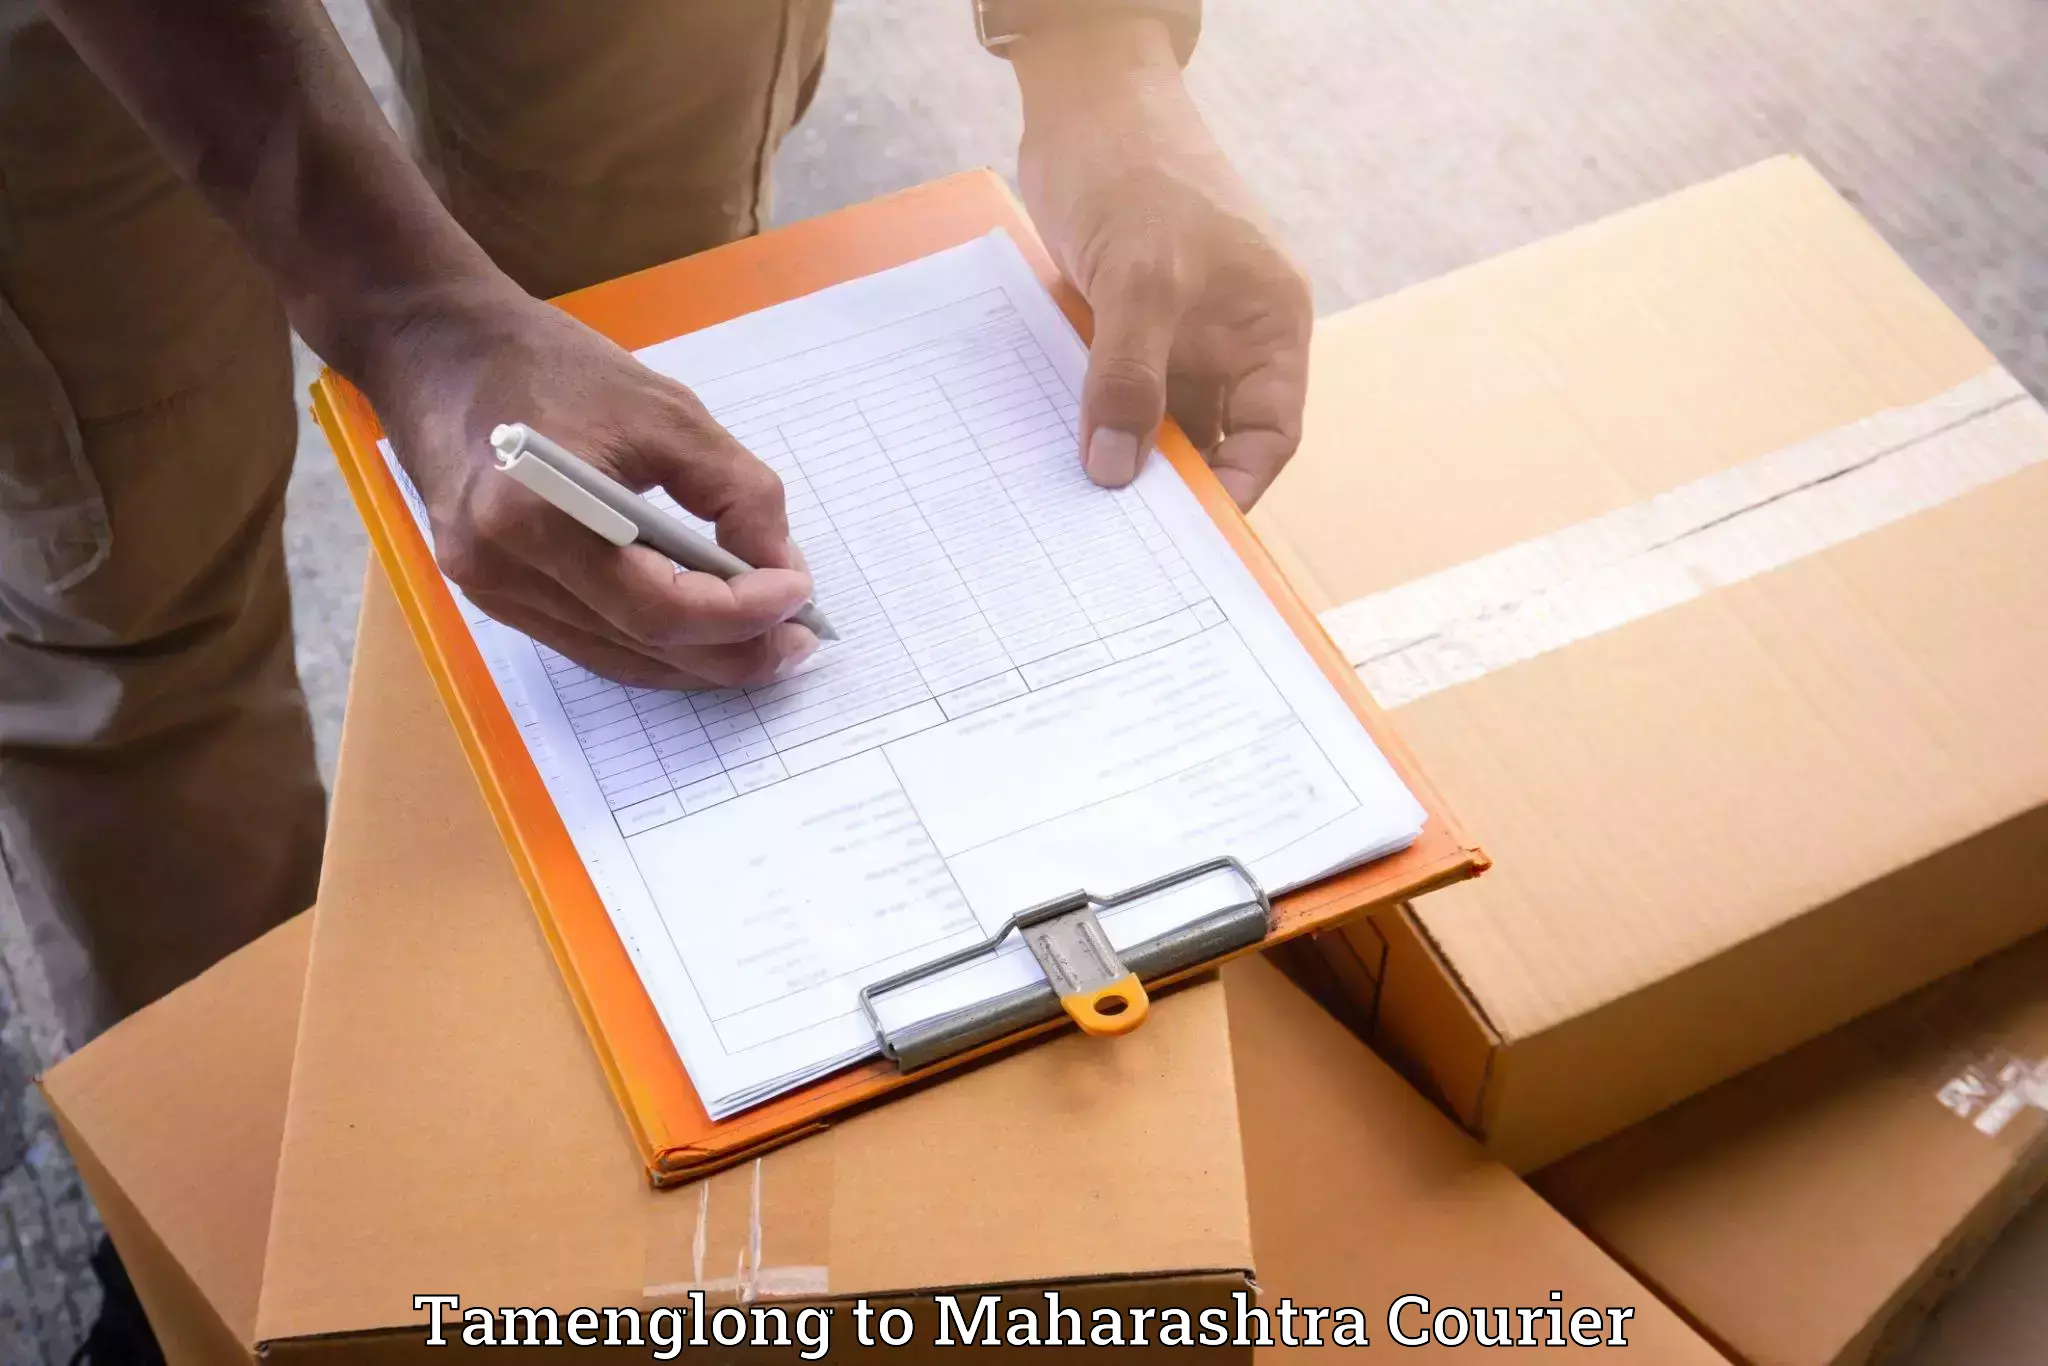 Furniture transport service Tamenglong to Dhule